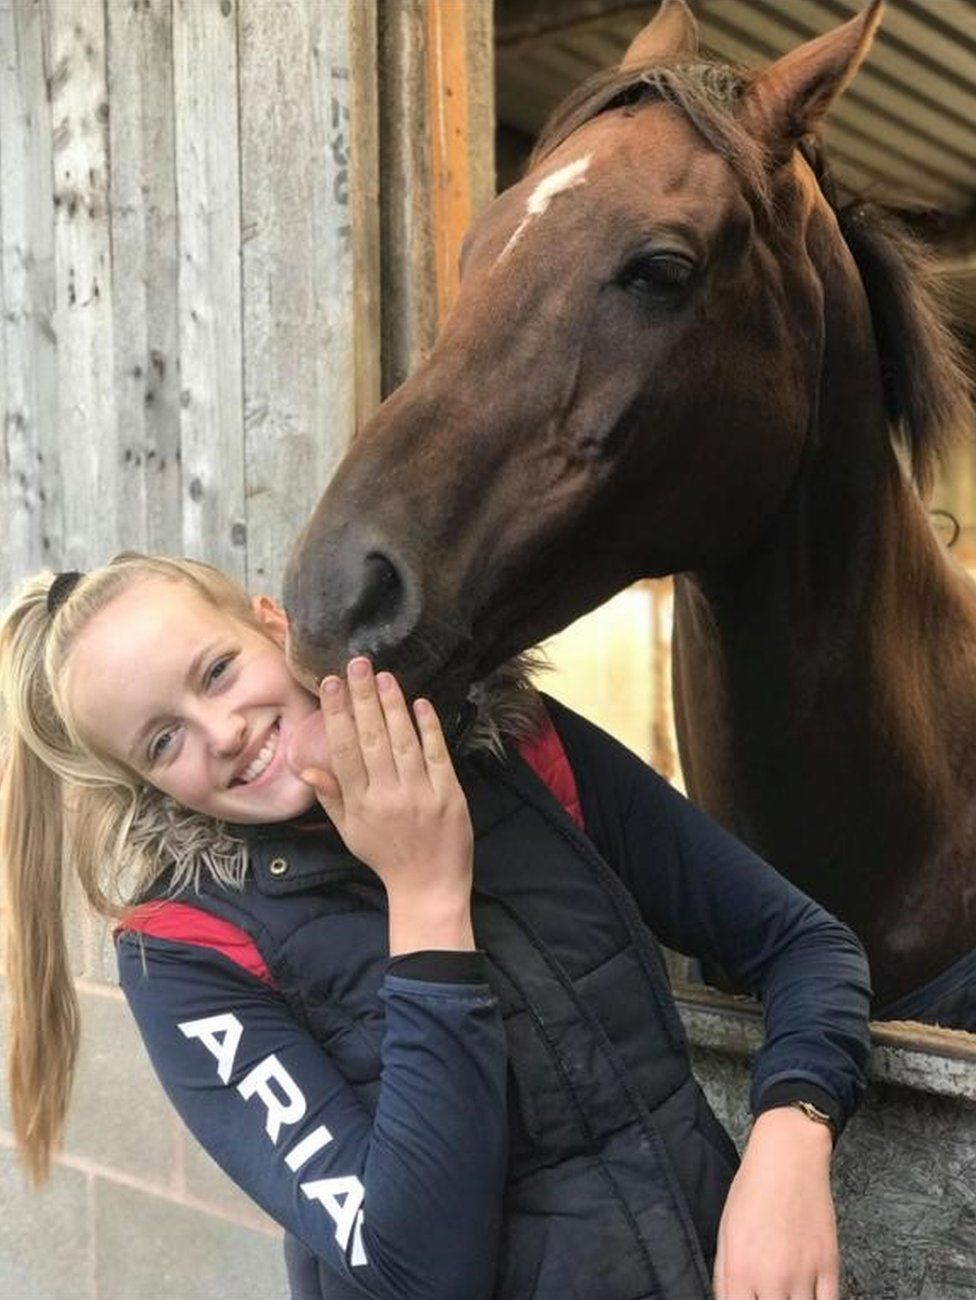 Gracie Spinks, 23, suffered a fatal stab wound to the neck while visiting her horse in Derbyshire